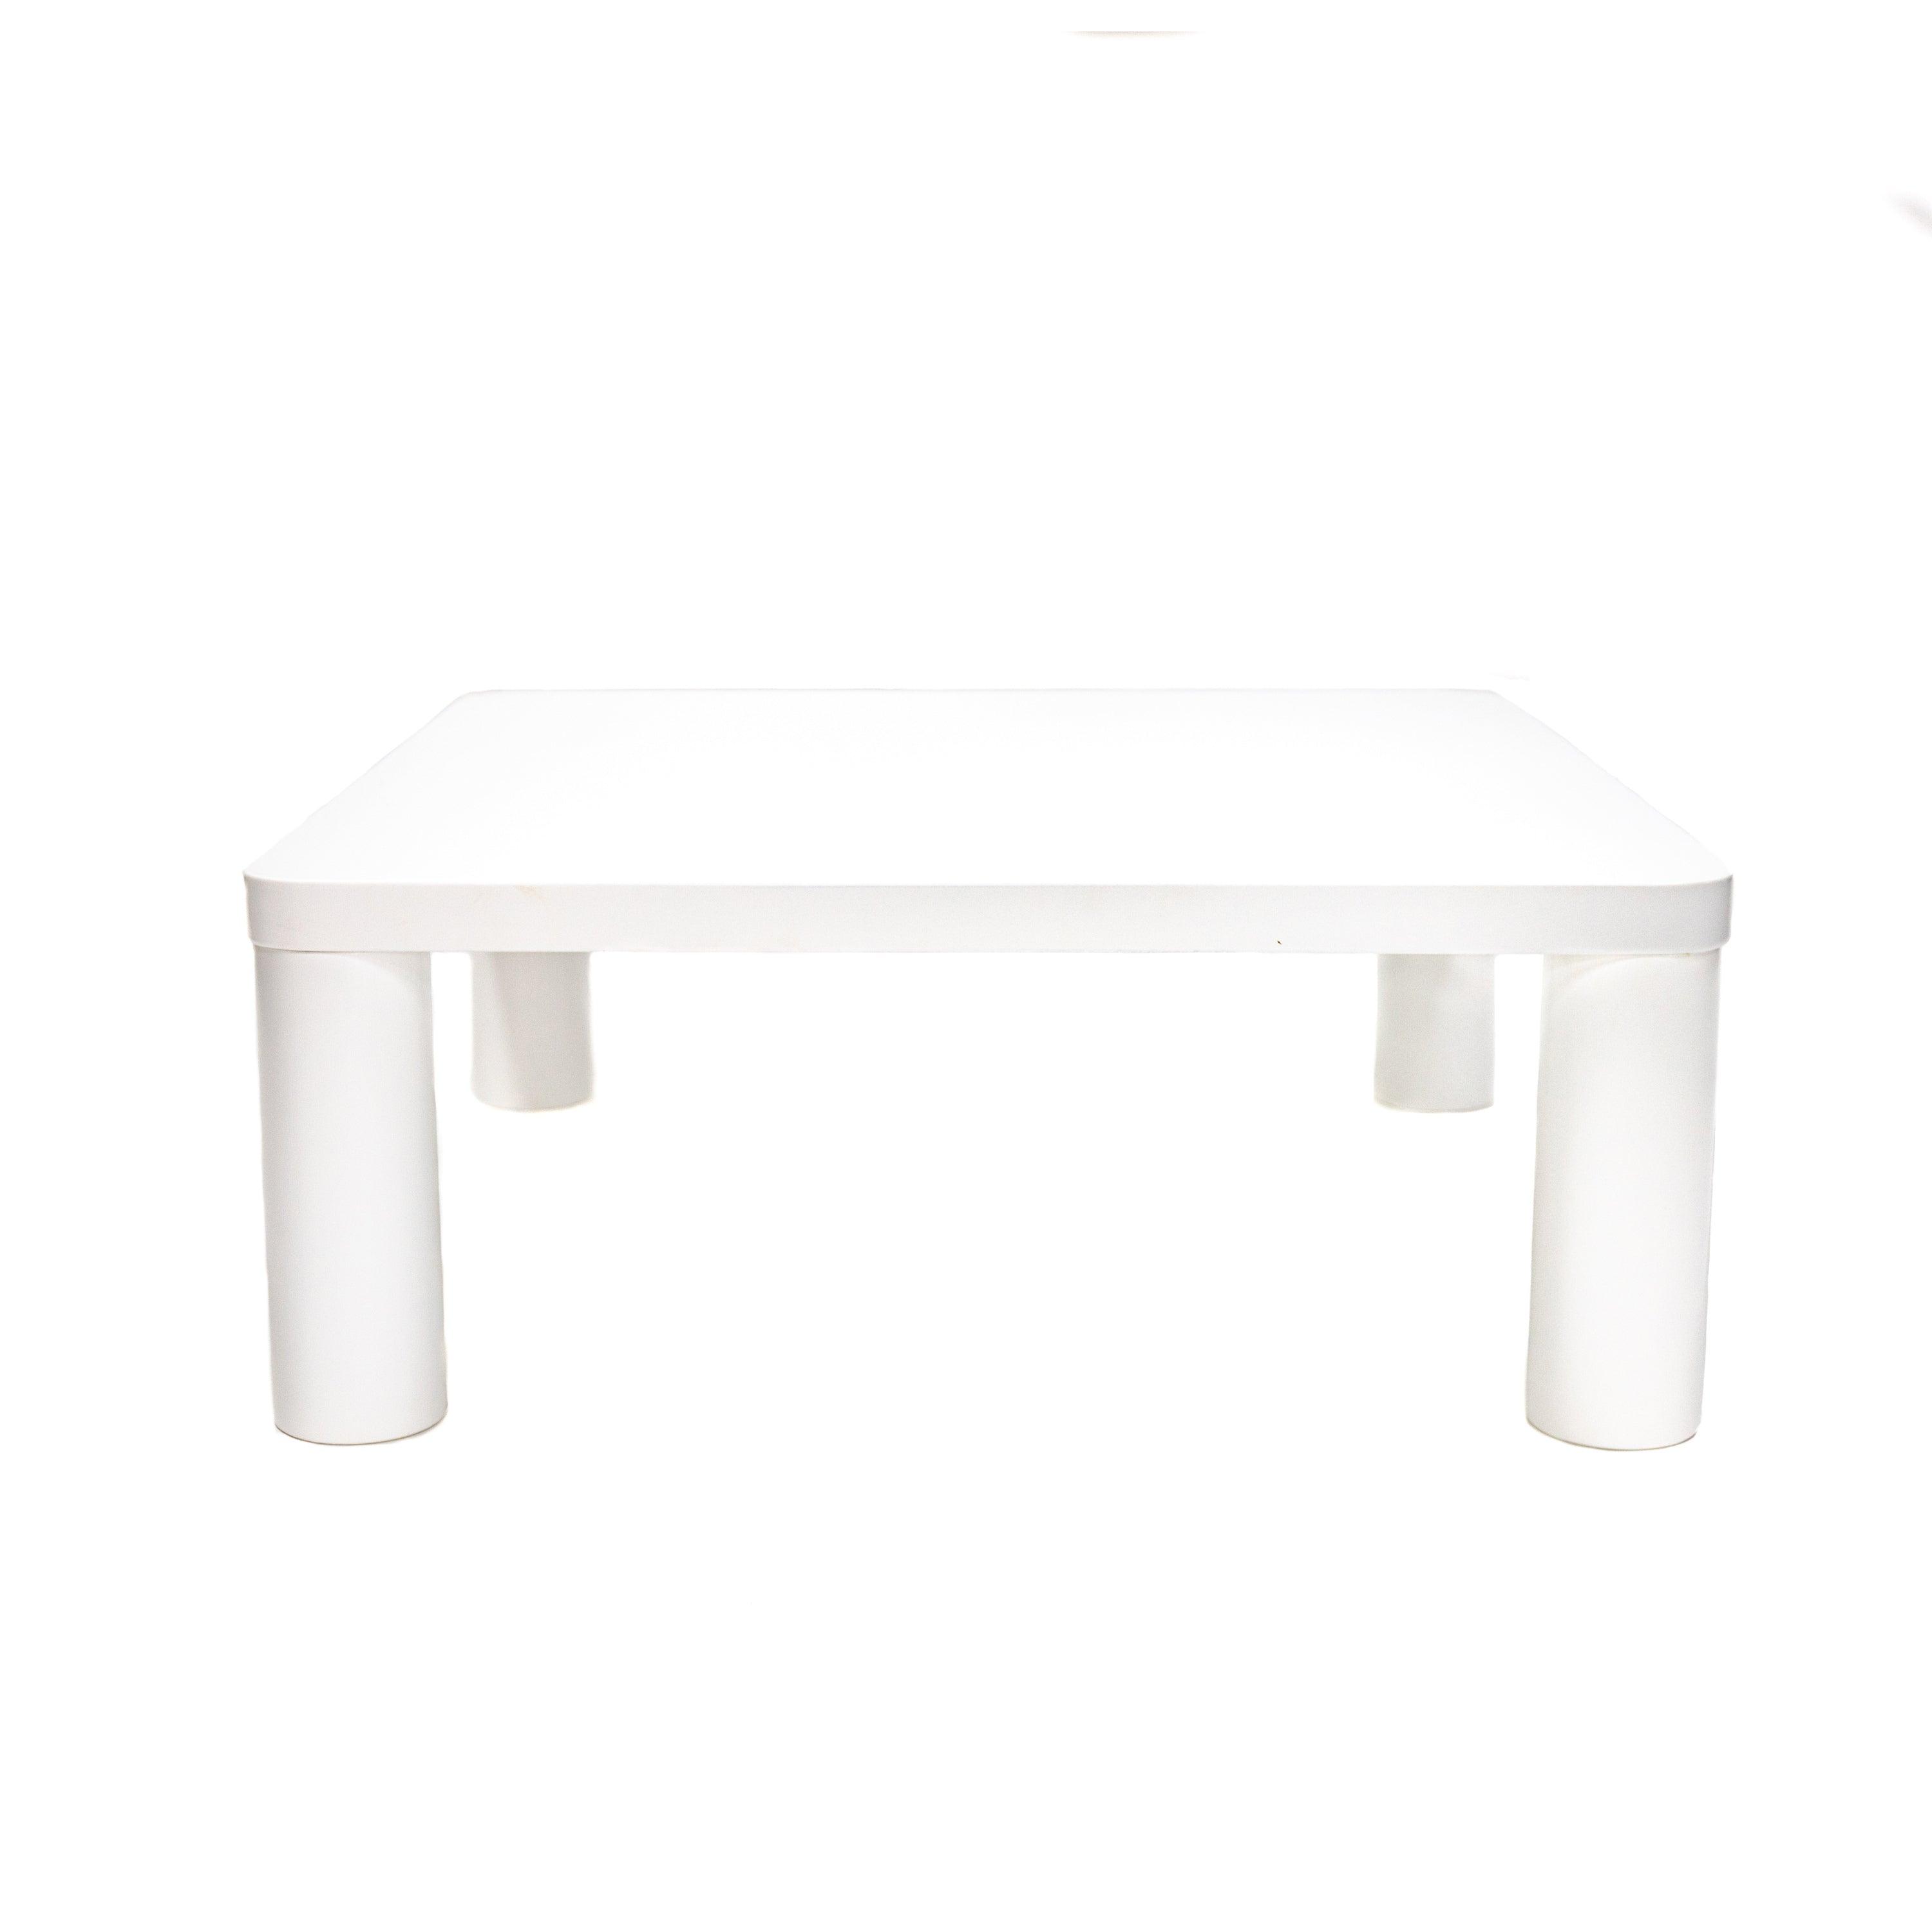 Cream White Coffe Table, 33.5" Modern Minimalist Square Coffee Tables for Living Room Home Office, Tatami Floor Tables